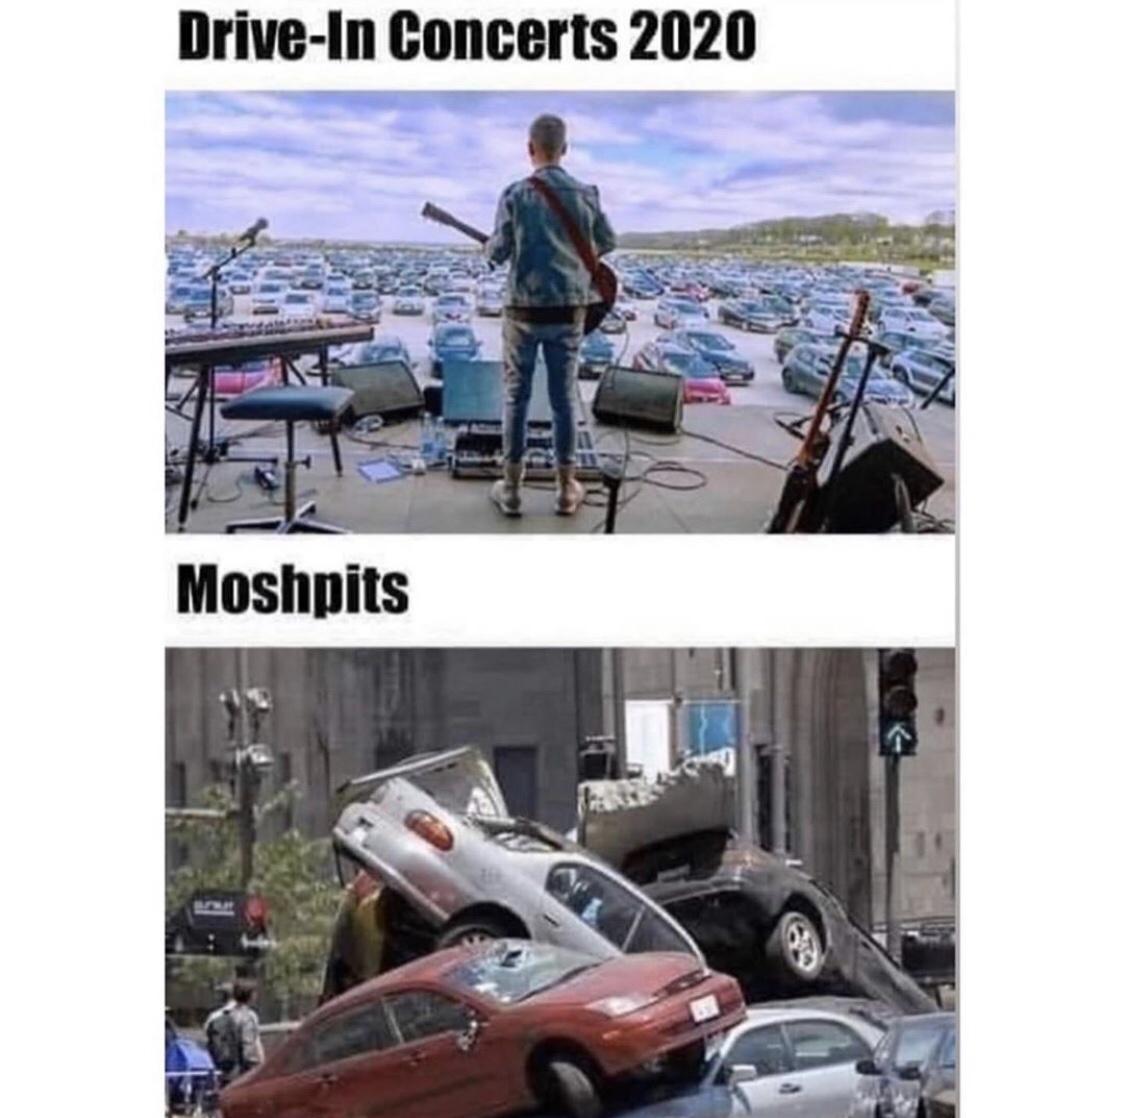 drive in concerts 2020 mosh pits - DriveIn Concerts 2020 Moshpits